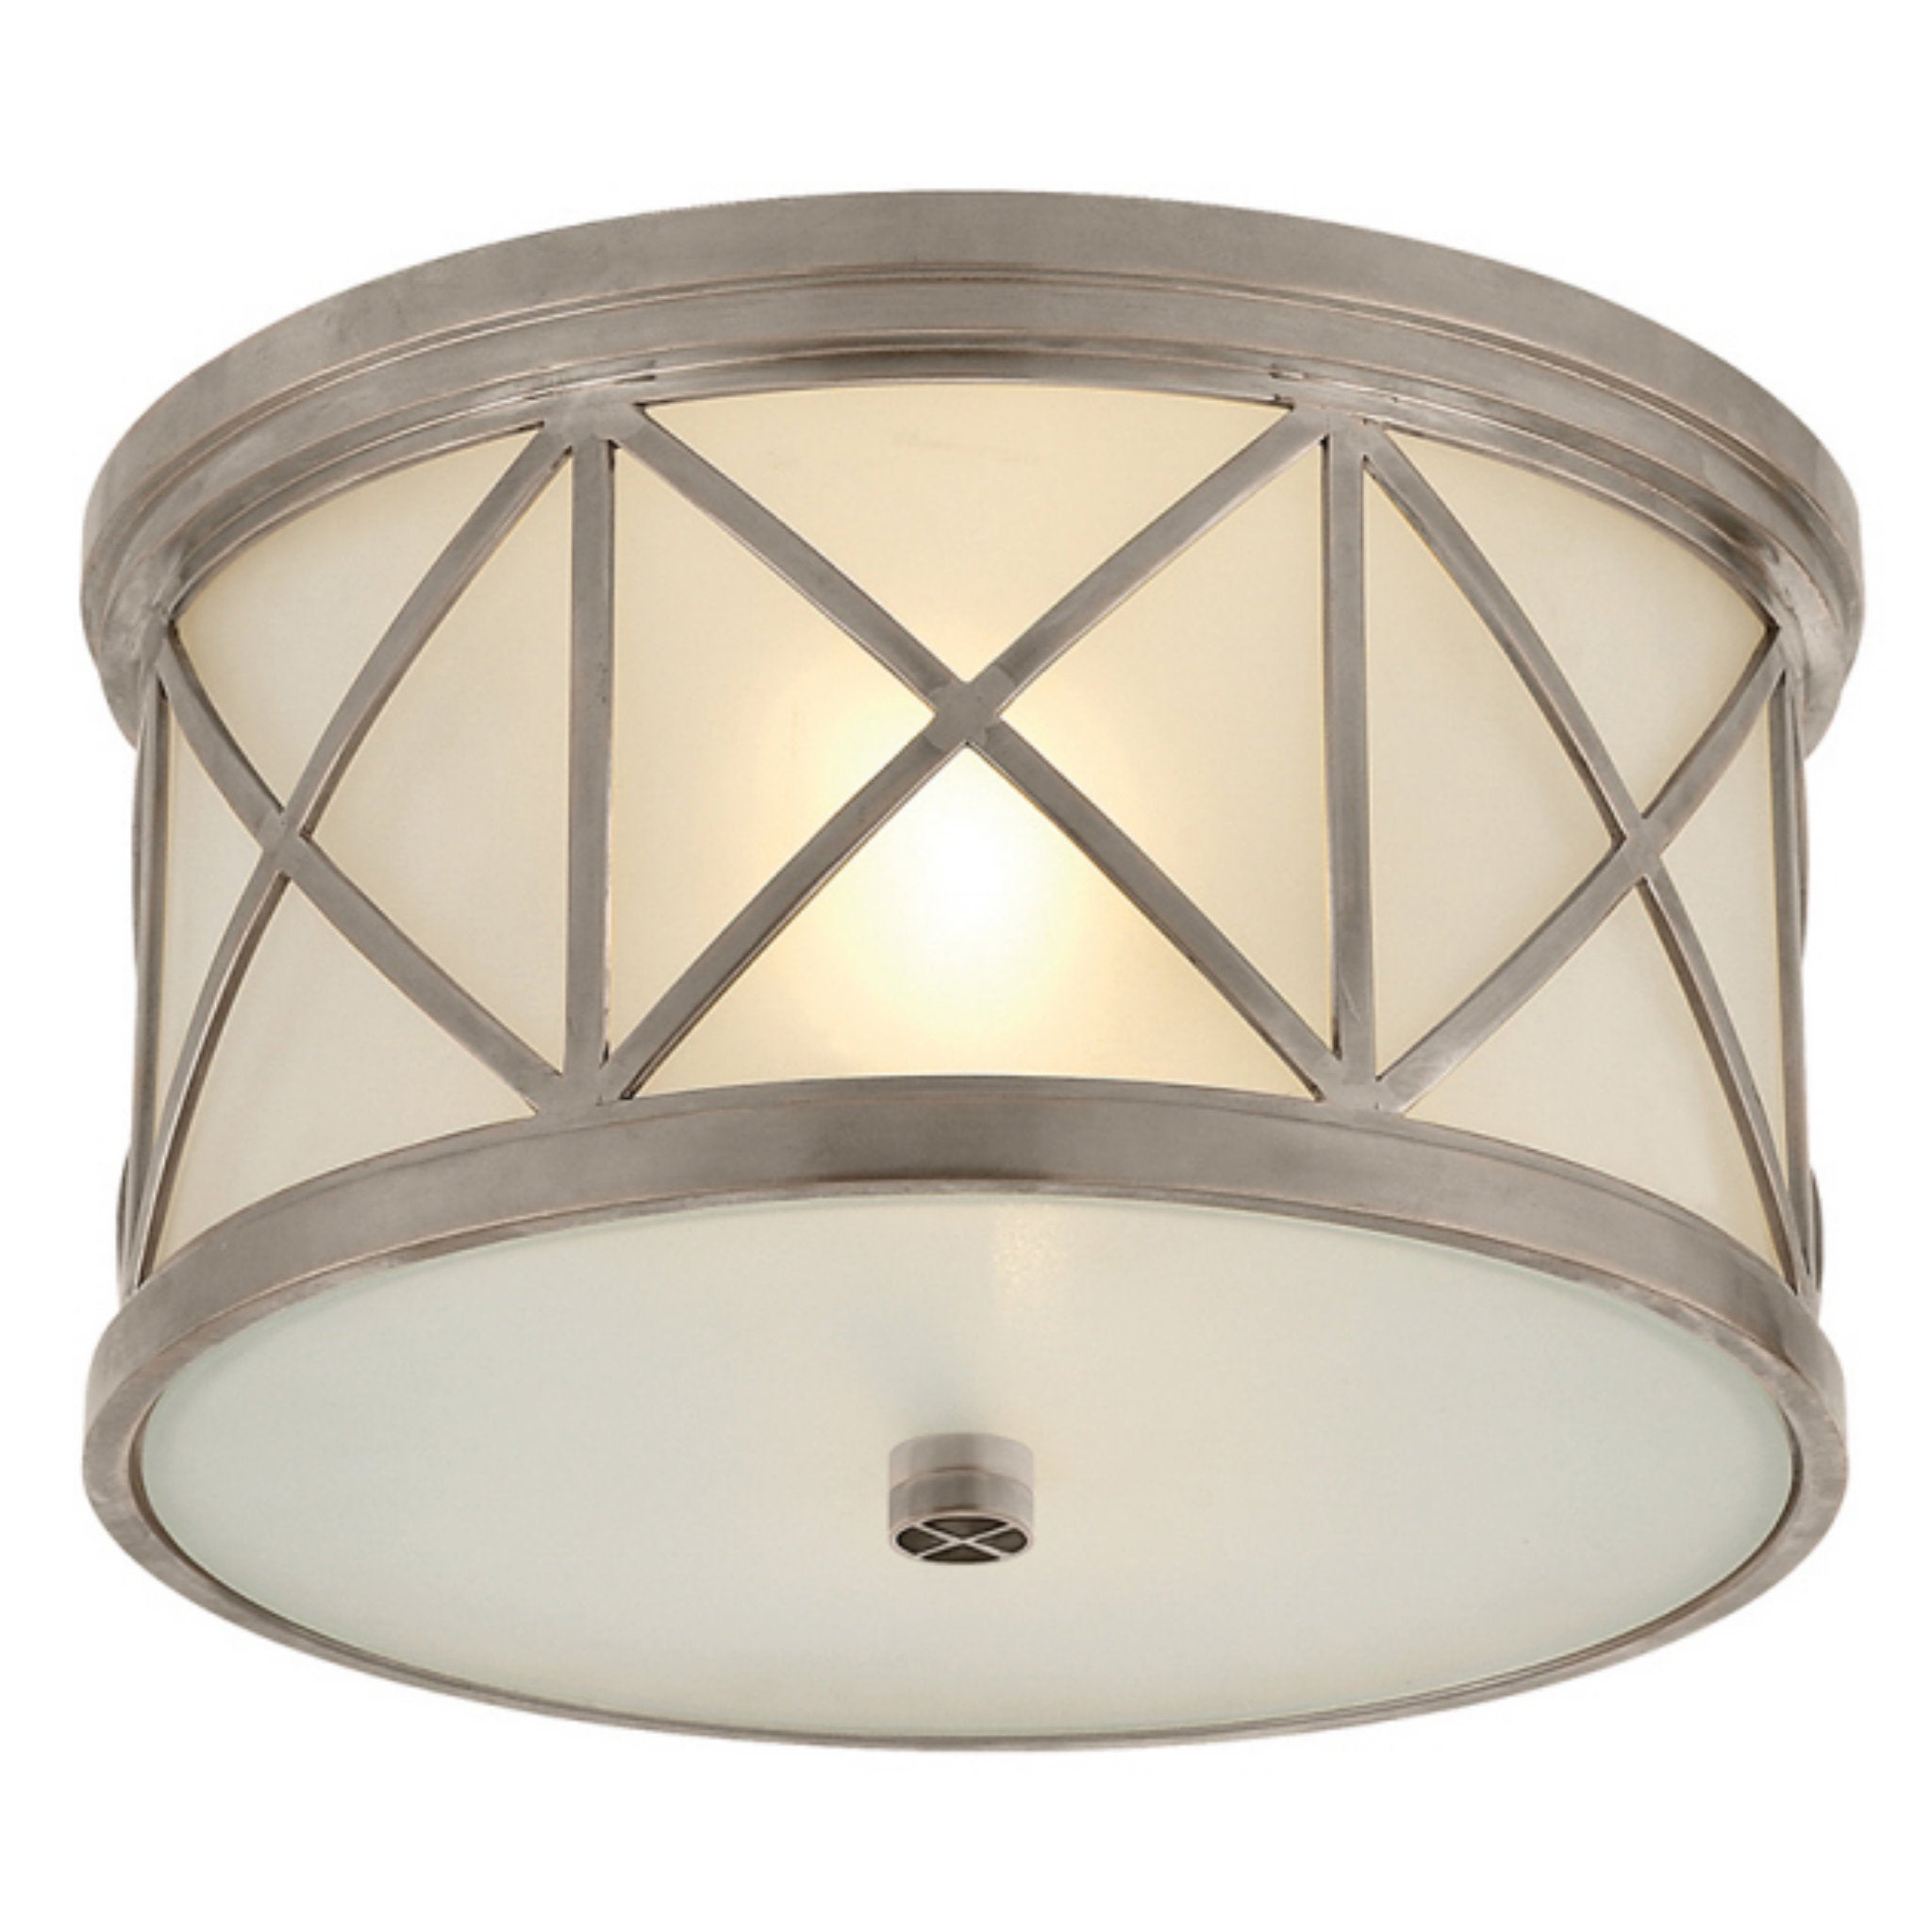 Suzanne Kasler Montpelier Small Flush Mount in Antique Nickel with Frosted Glass